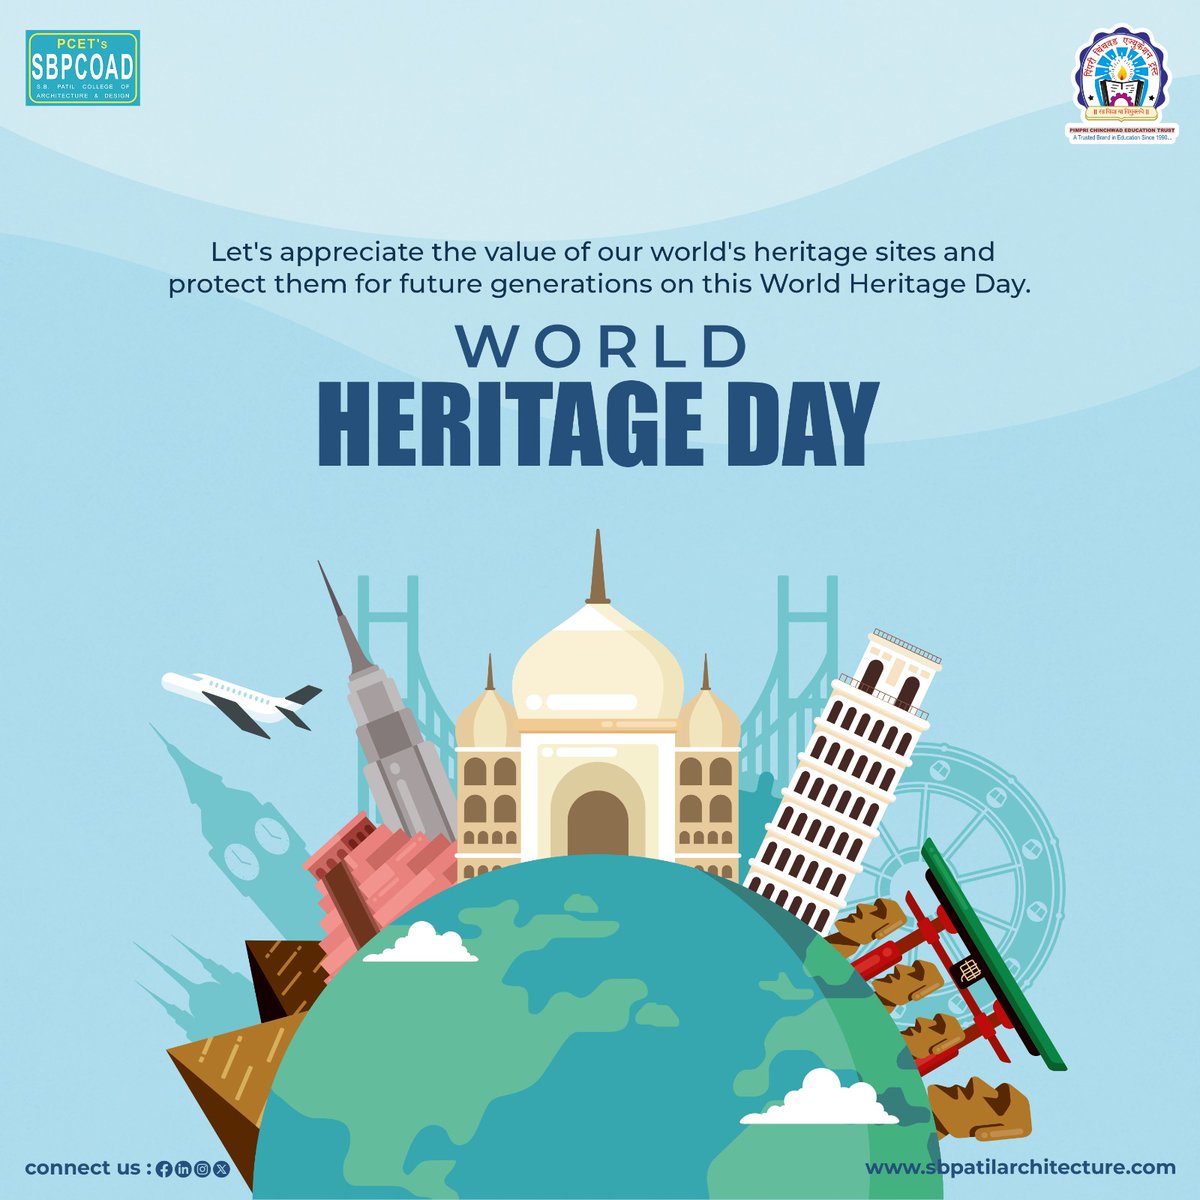 For a proud state that boasts of India’s highest number of Unesco World Heritage Sites, on this World Heritage Day, let's pledge to preserve historical heritage of our magnificent Maharashtra! #PCET #SBPCOAD #WorldHeritageDay2024 #world #heritage #heritageday #18april #history